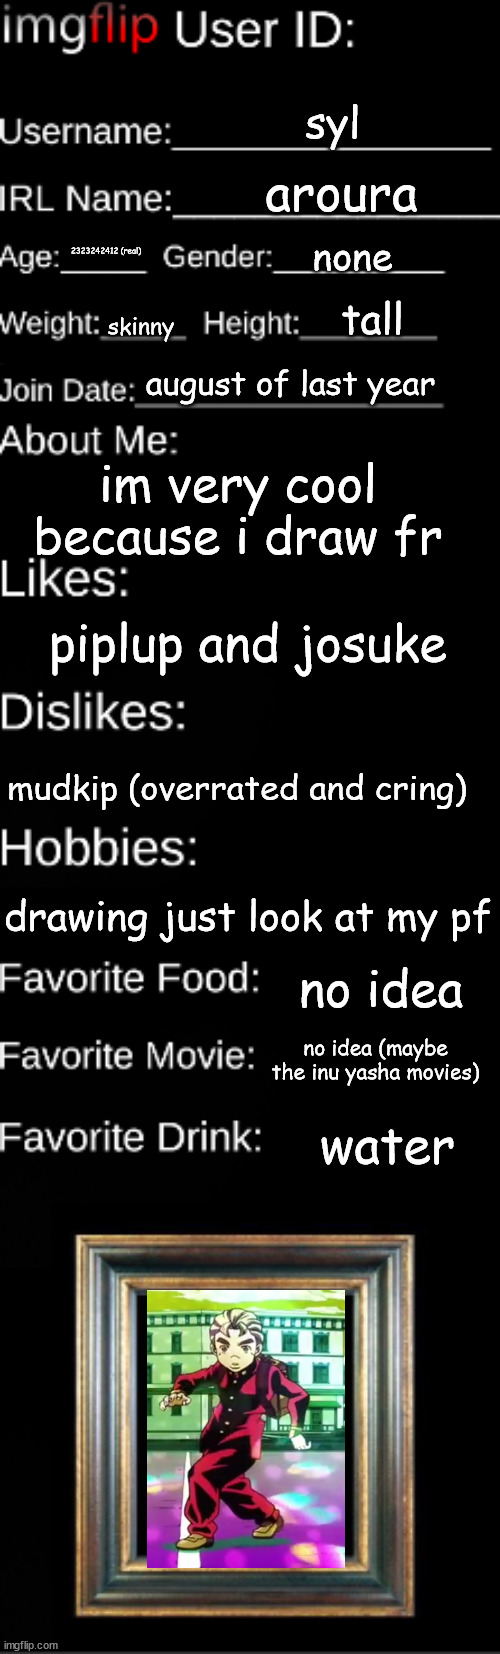 sdfdgdg | syl; aroura; none; 2323242412 (real); tall; skinny; august of last year; im very cool because i draw fr; piplup and josuke; mudkip (overrated and cring); drawing just look at my pf; no idea; no idea (maybe the inu yasha movies); water | image tagged in imgflip user id | made w/ Imgflip meme maker